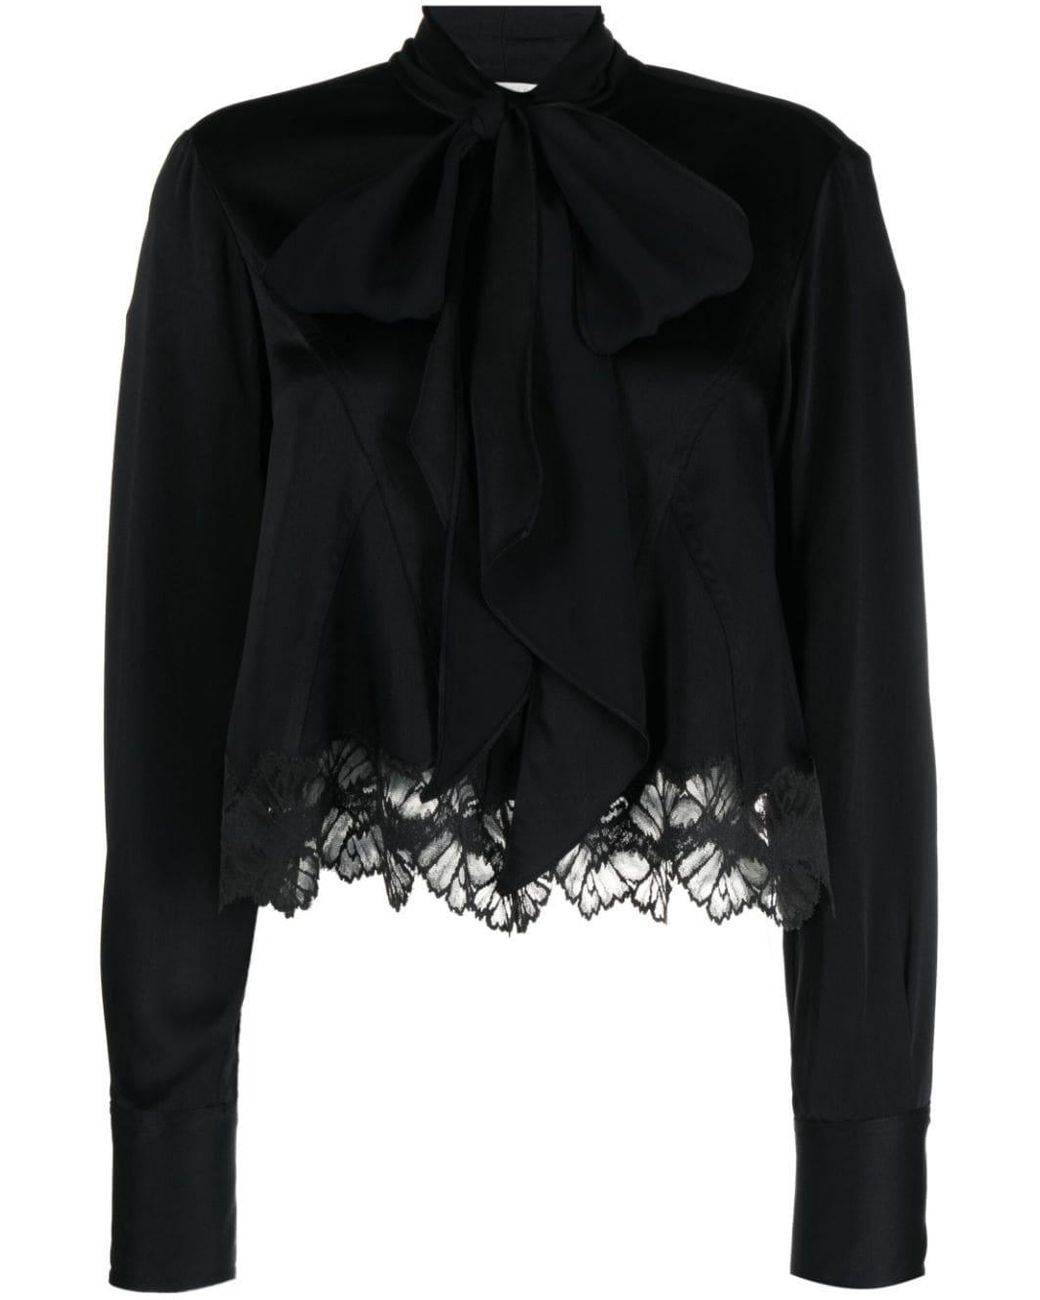 Stella McCartney Pussy-bow Lace-trim Blouse in Black | Lyst